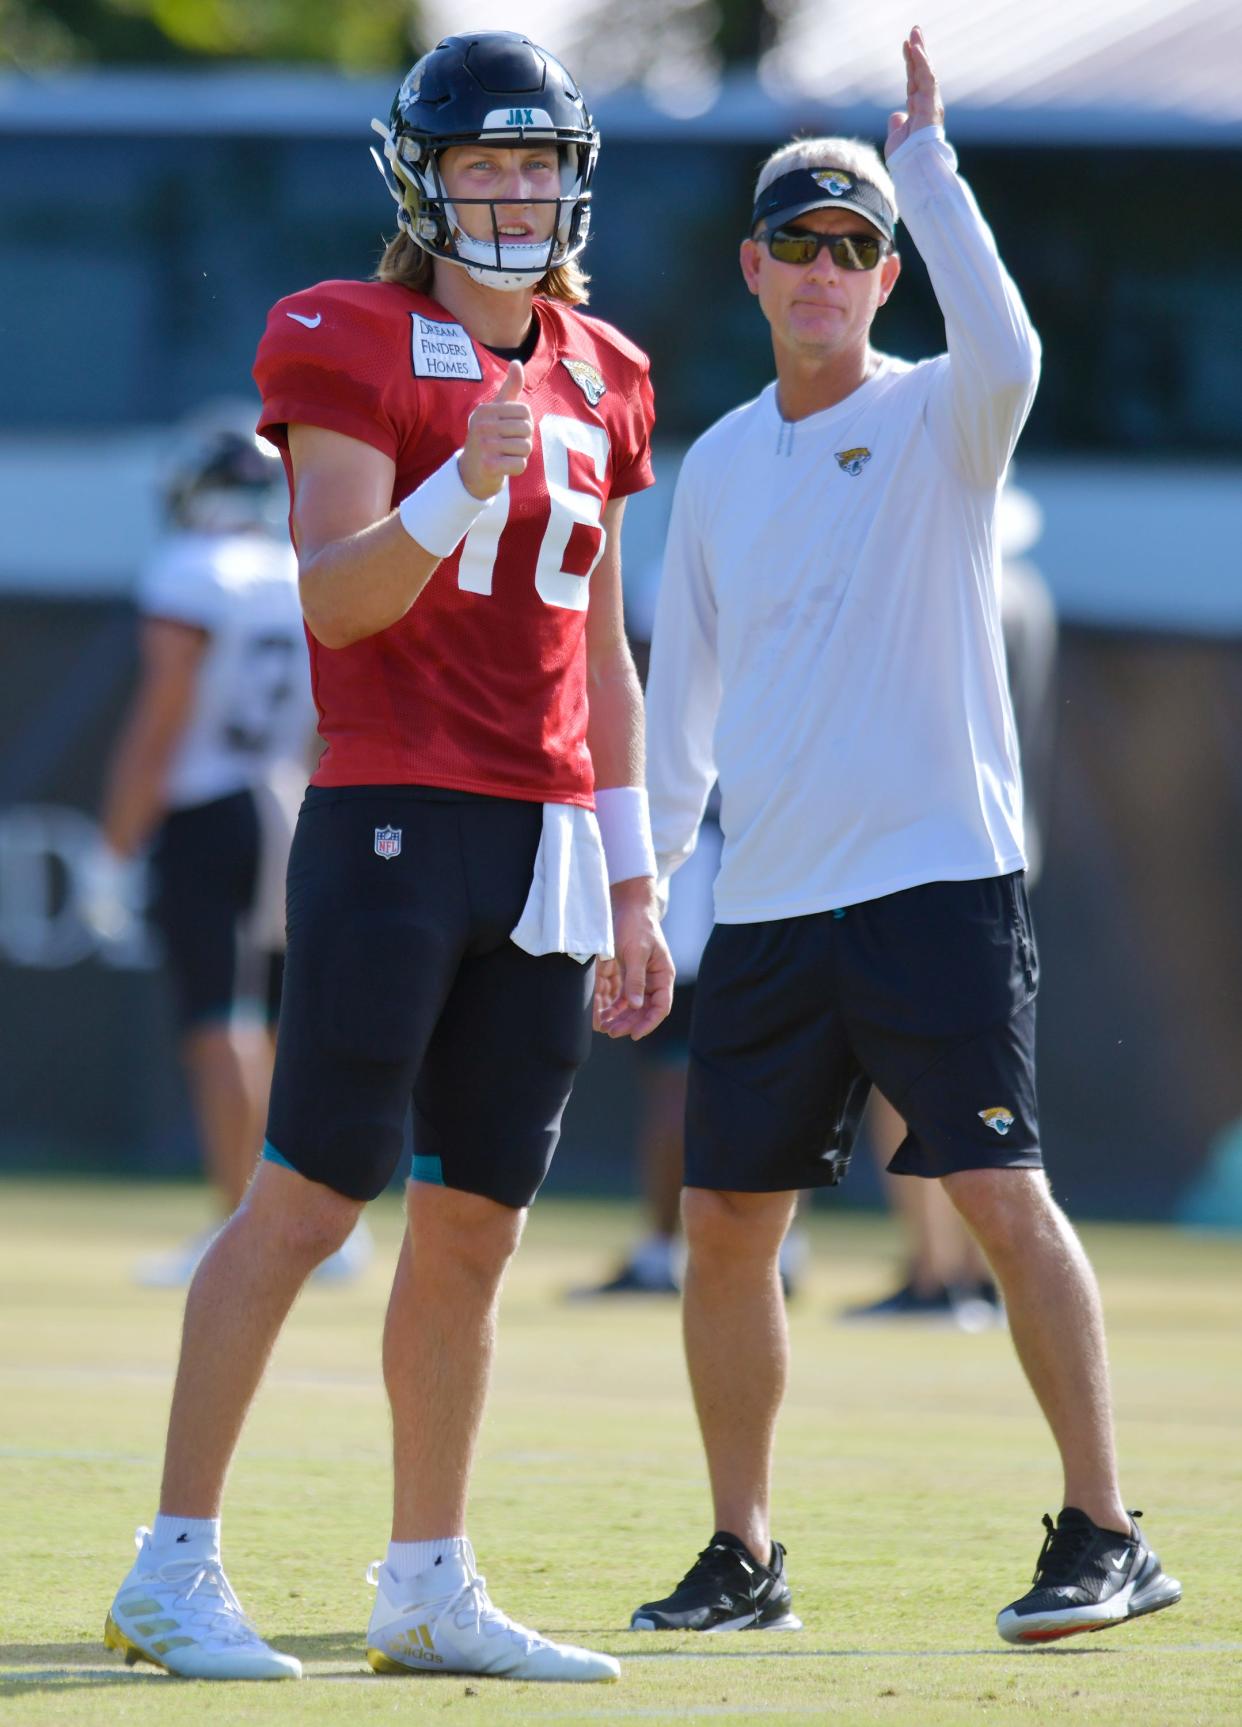 Jacksonville Jaguars quarterback Trevor Lawrence (16) talks with Quarterbacks coach Mike McCoy during Monday's training camp session. The Jacksonville Jaguars held training camp Monday, August 1, 2022, at the Episcopal School of Jacksonville Knight Campus practice fields on Atlantic Blvd.